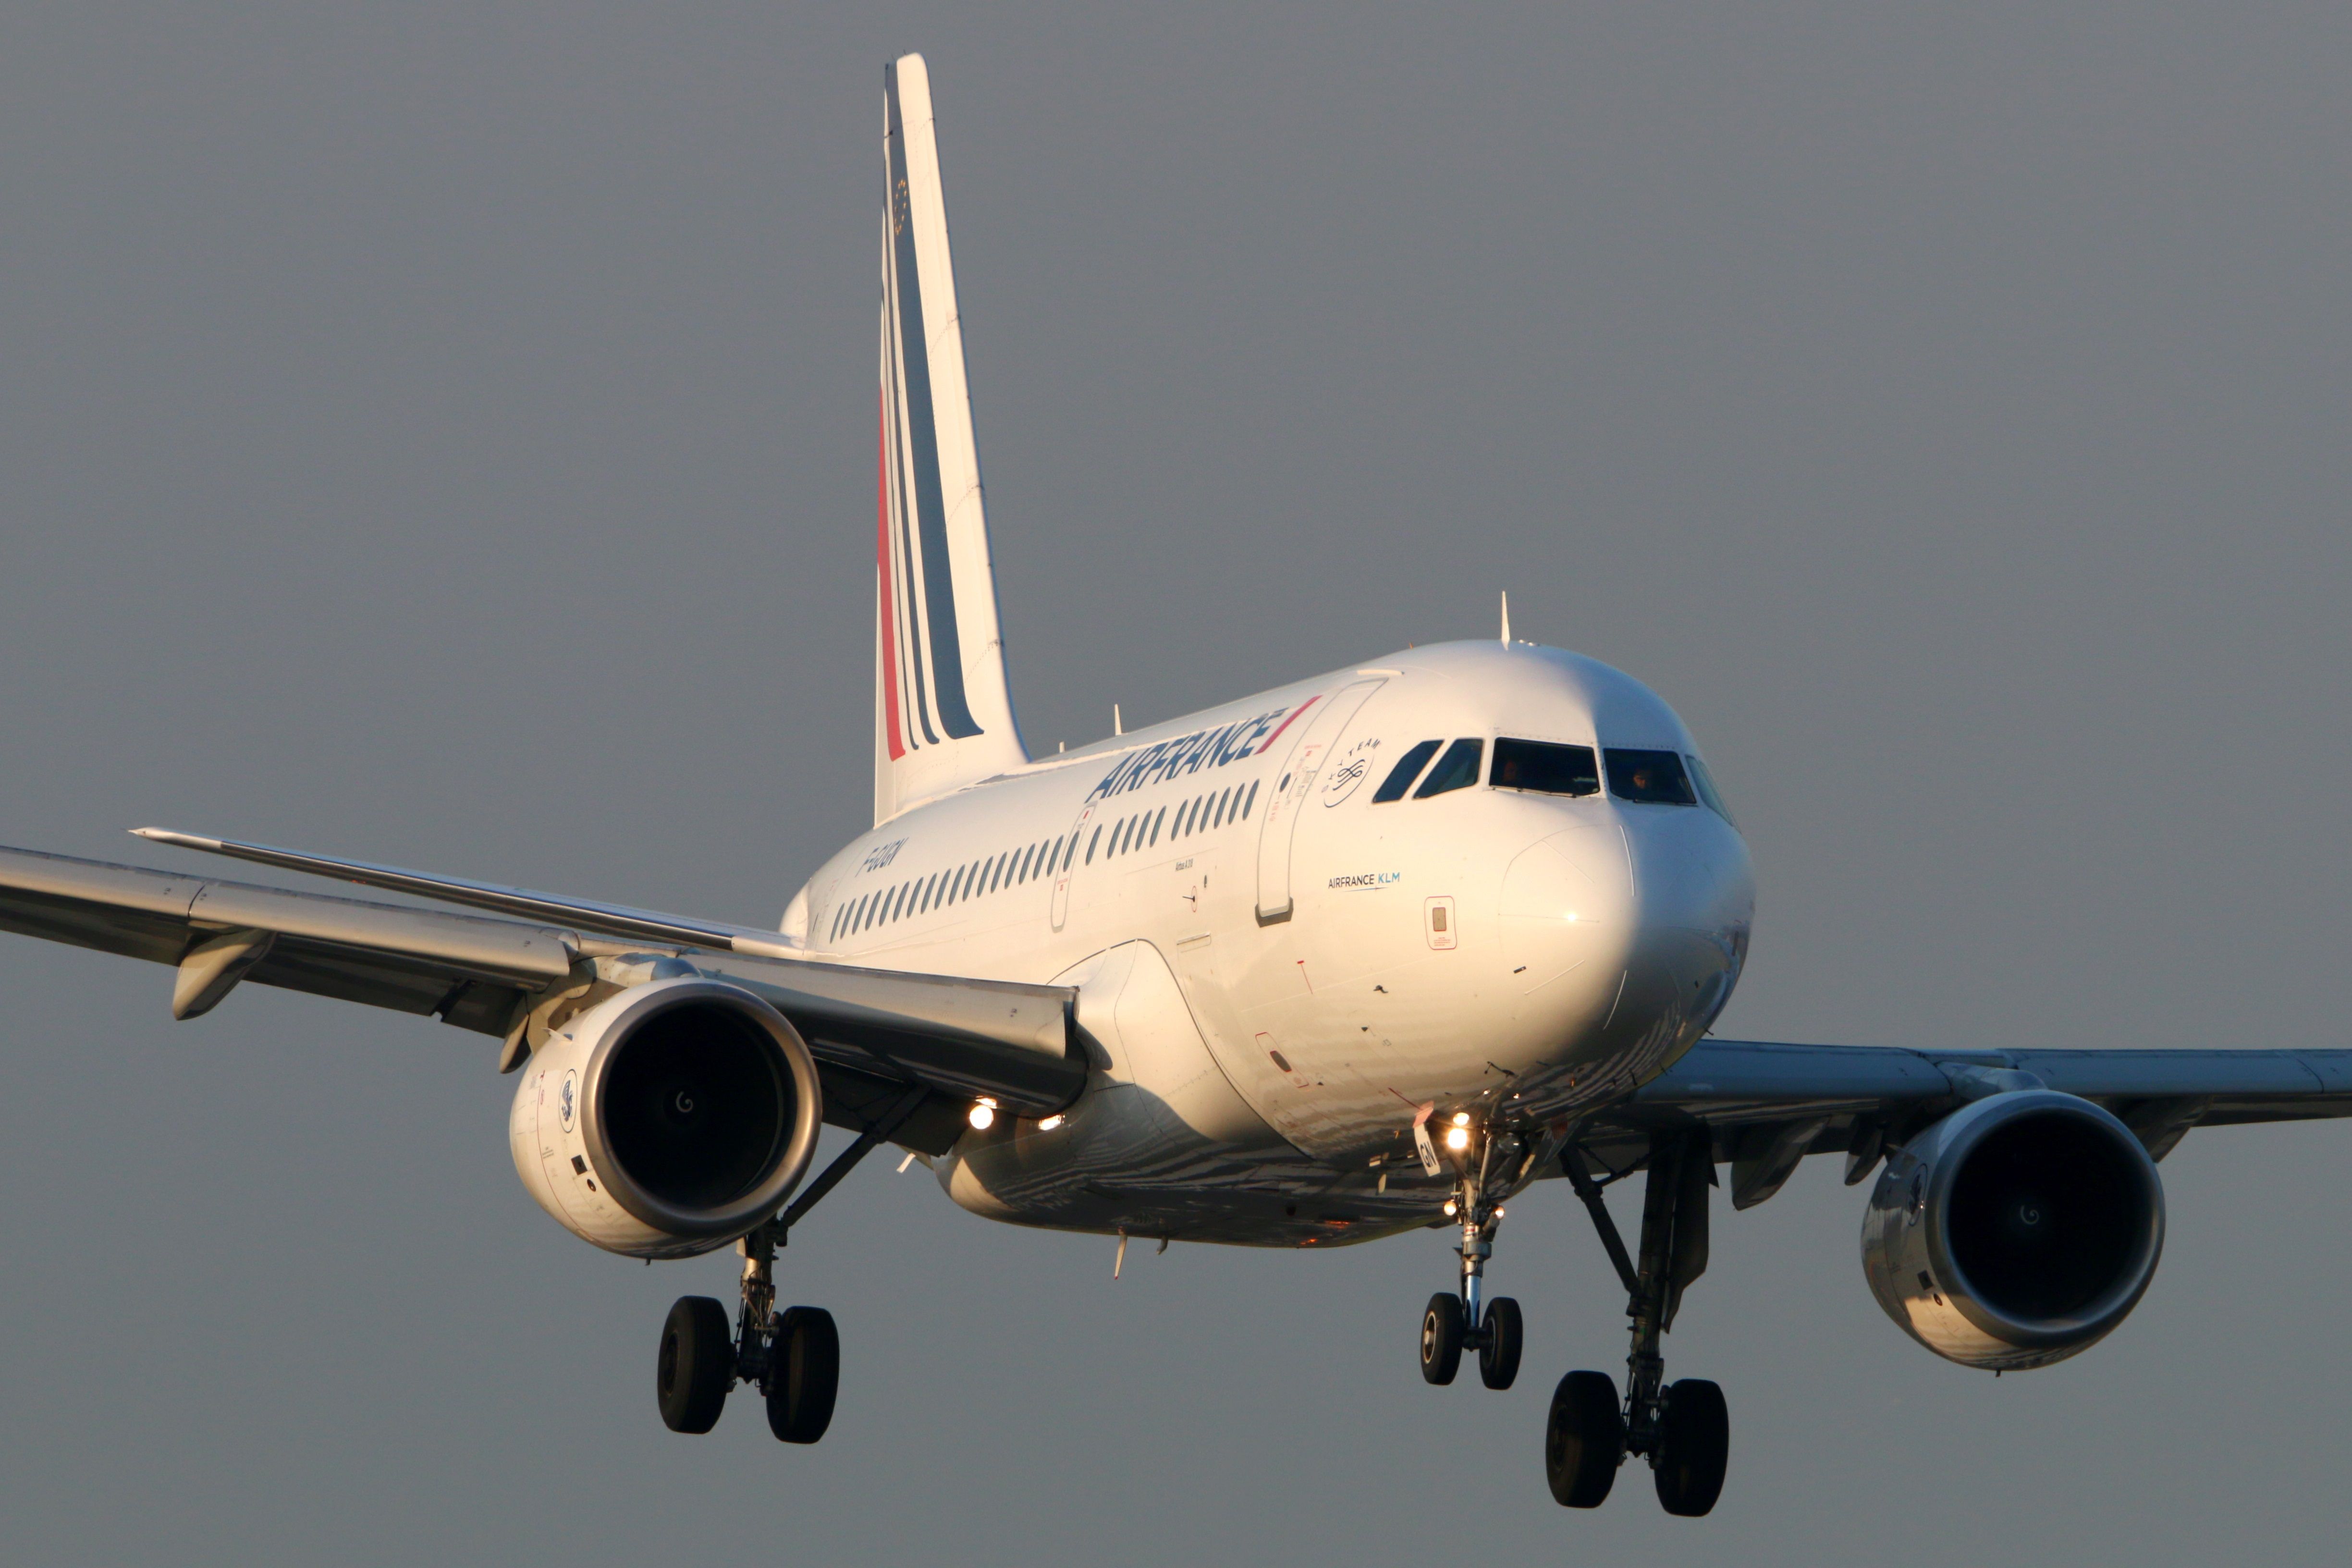 An Air France A318 about to land.